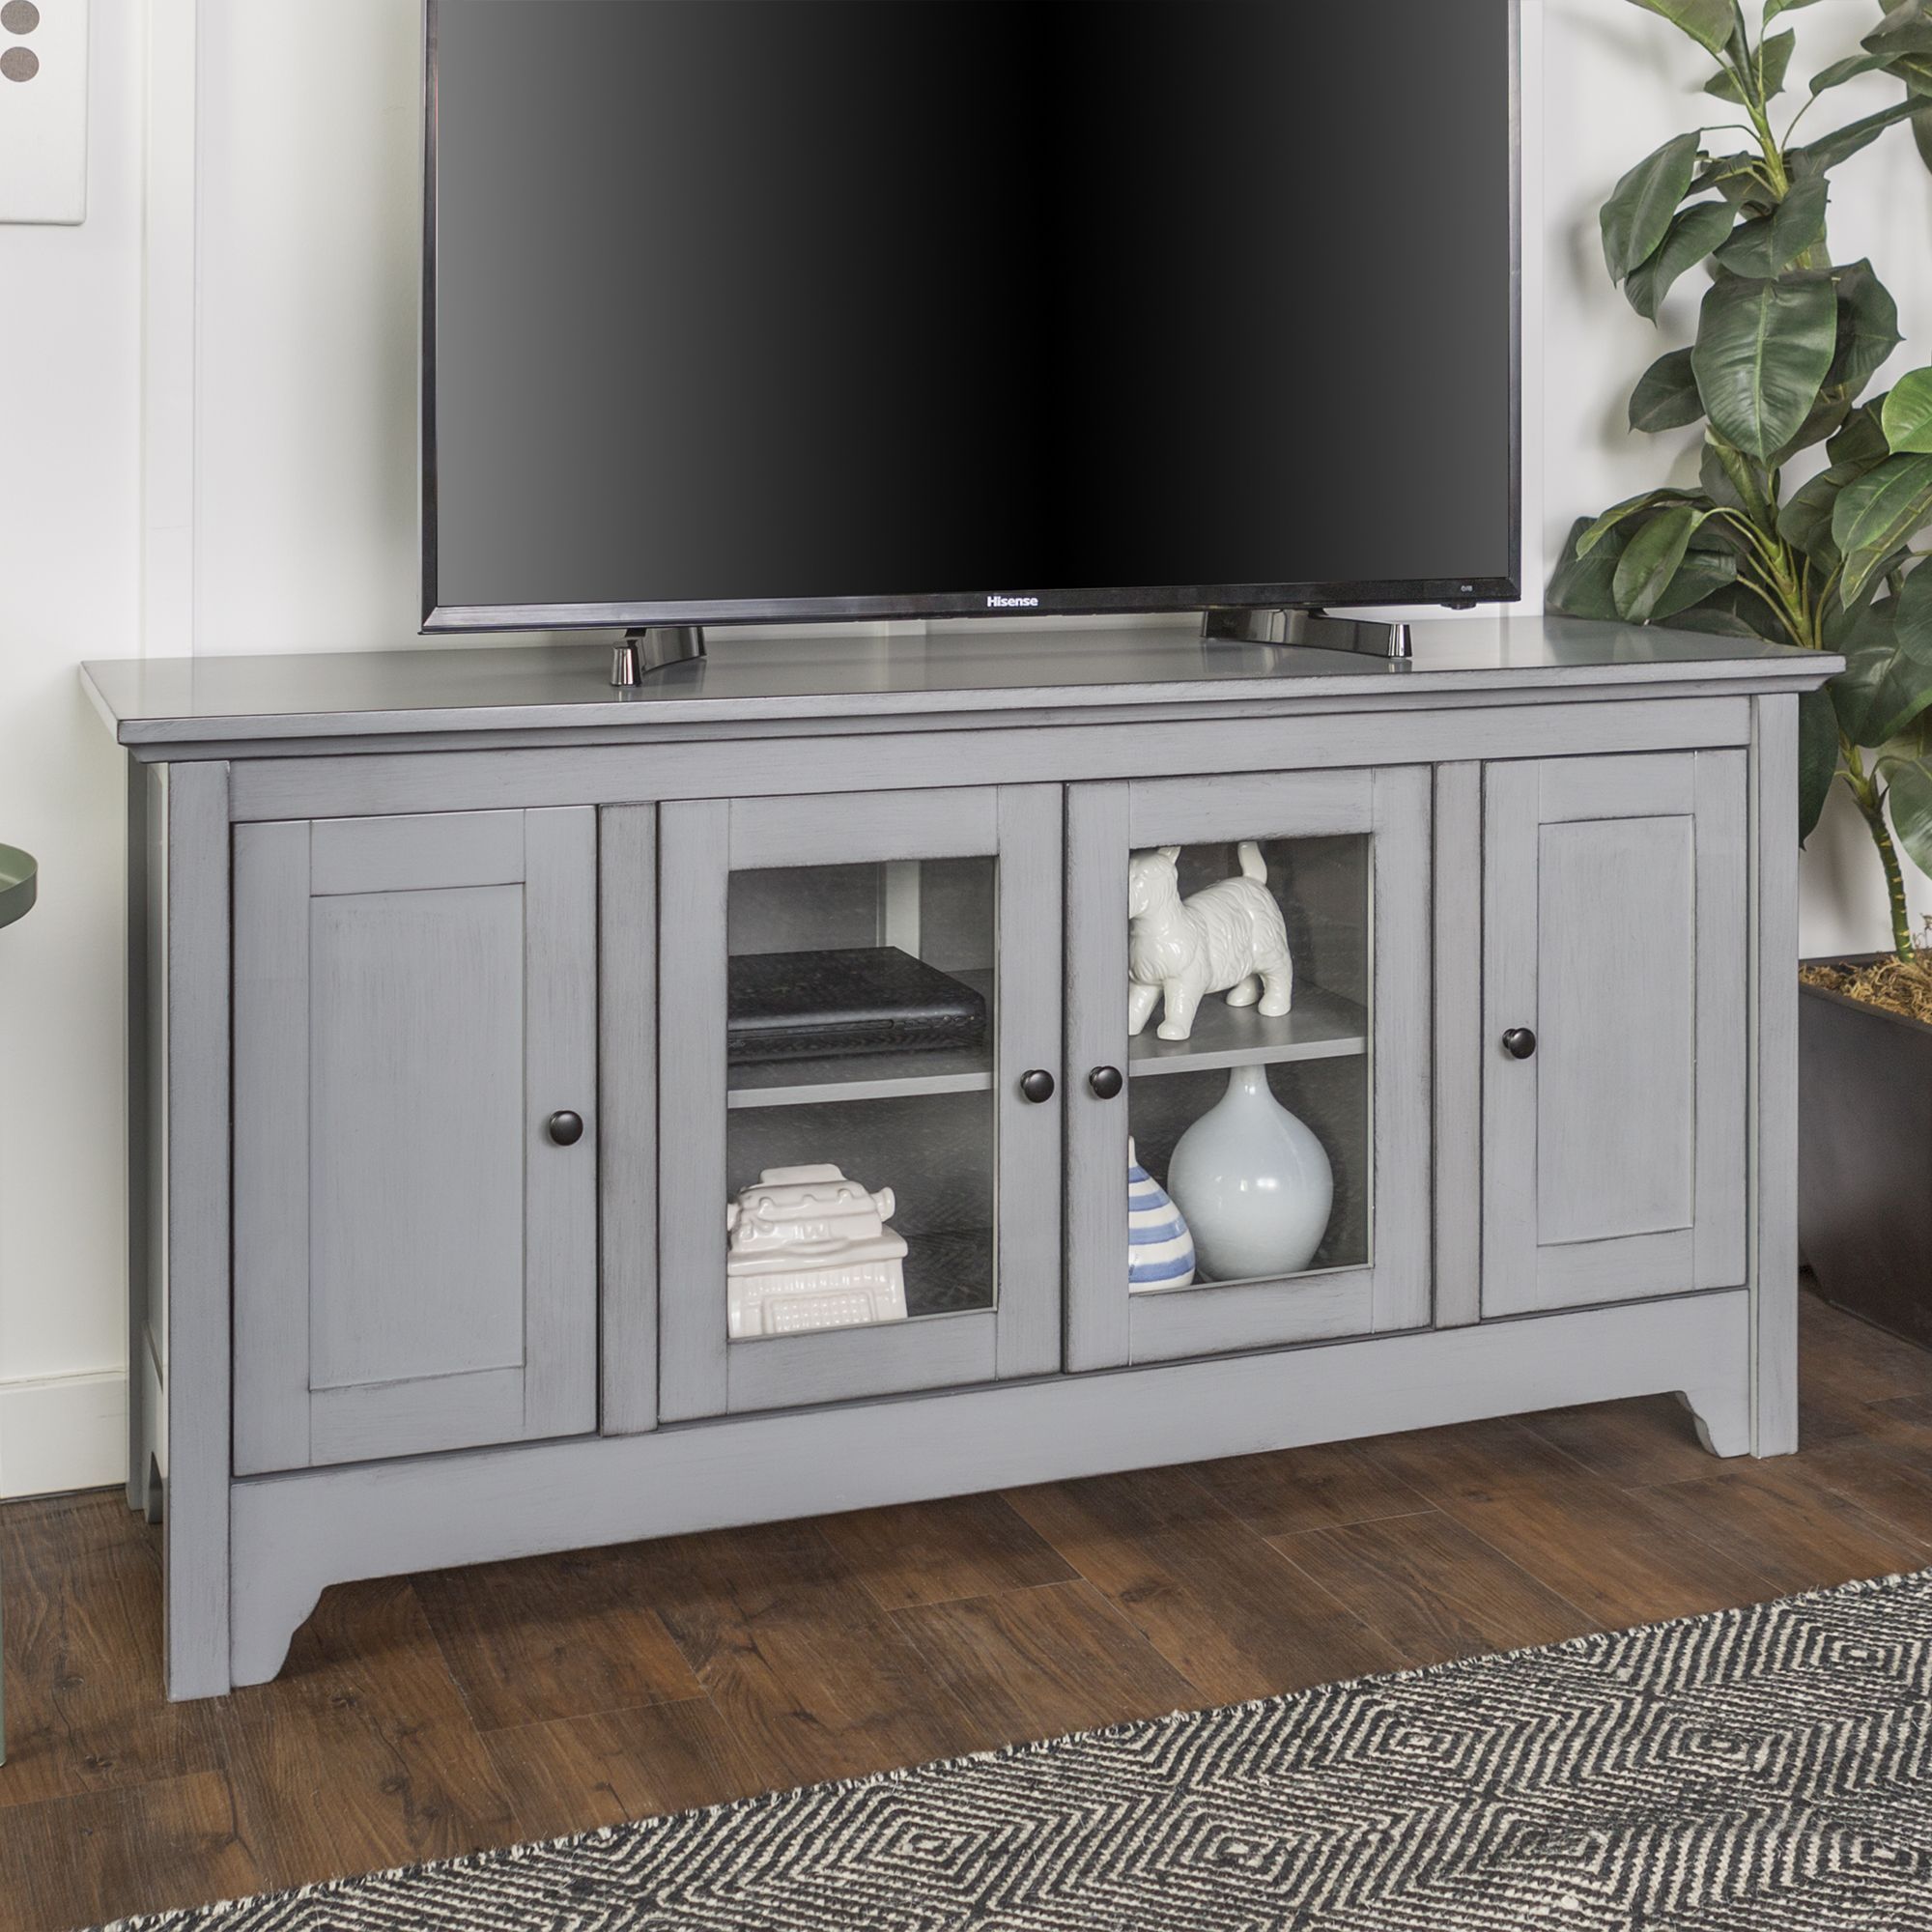 Walker Edison Antique Gray Wood Tv Stand For Tvs Up To 58" – Walmart For 110" Tvs Wood Tv Cabinet With Drawers (View 18 of 20)